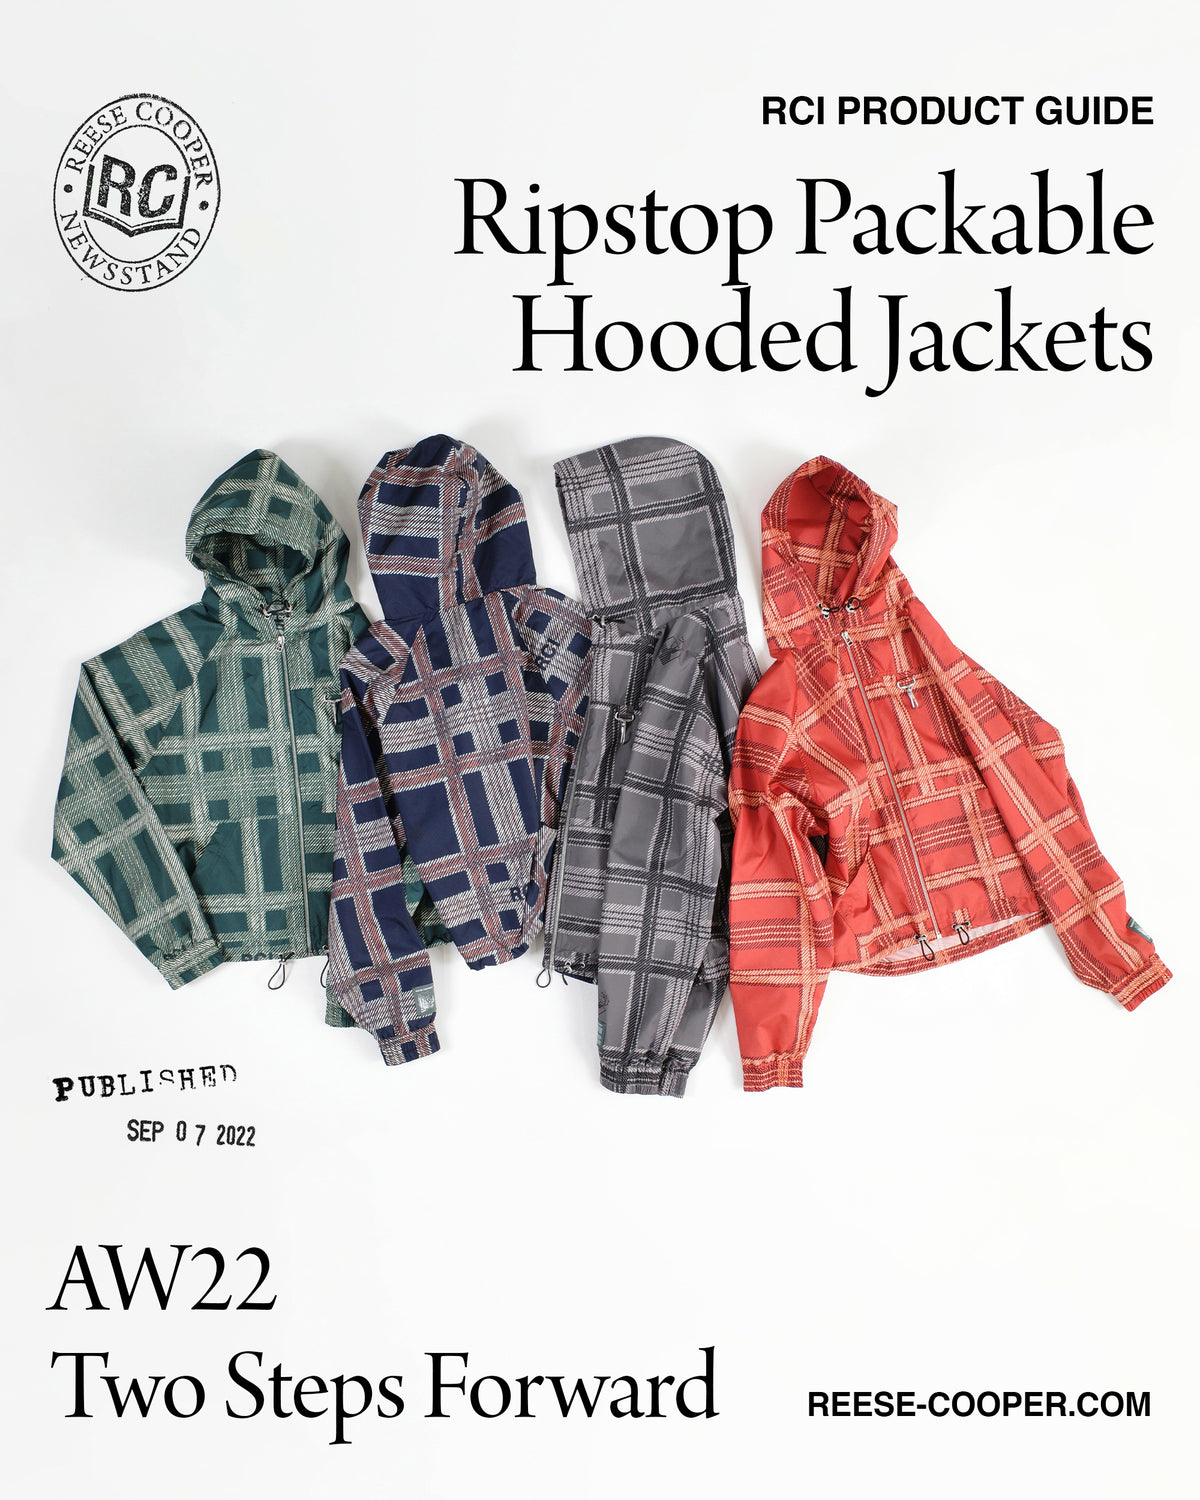 Product Guide: Ripstop Packable Hooded Jackets